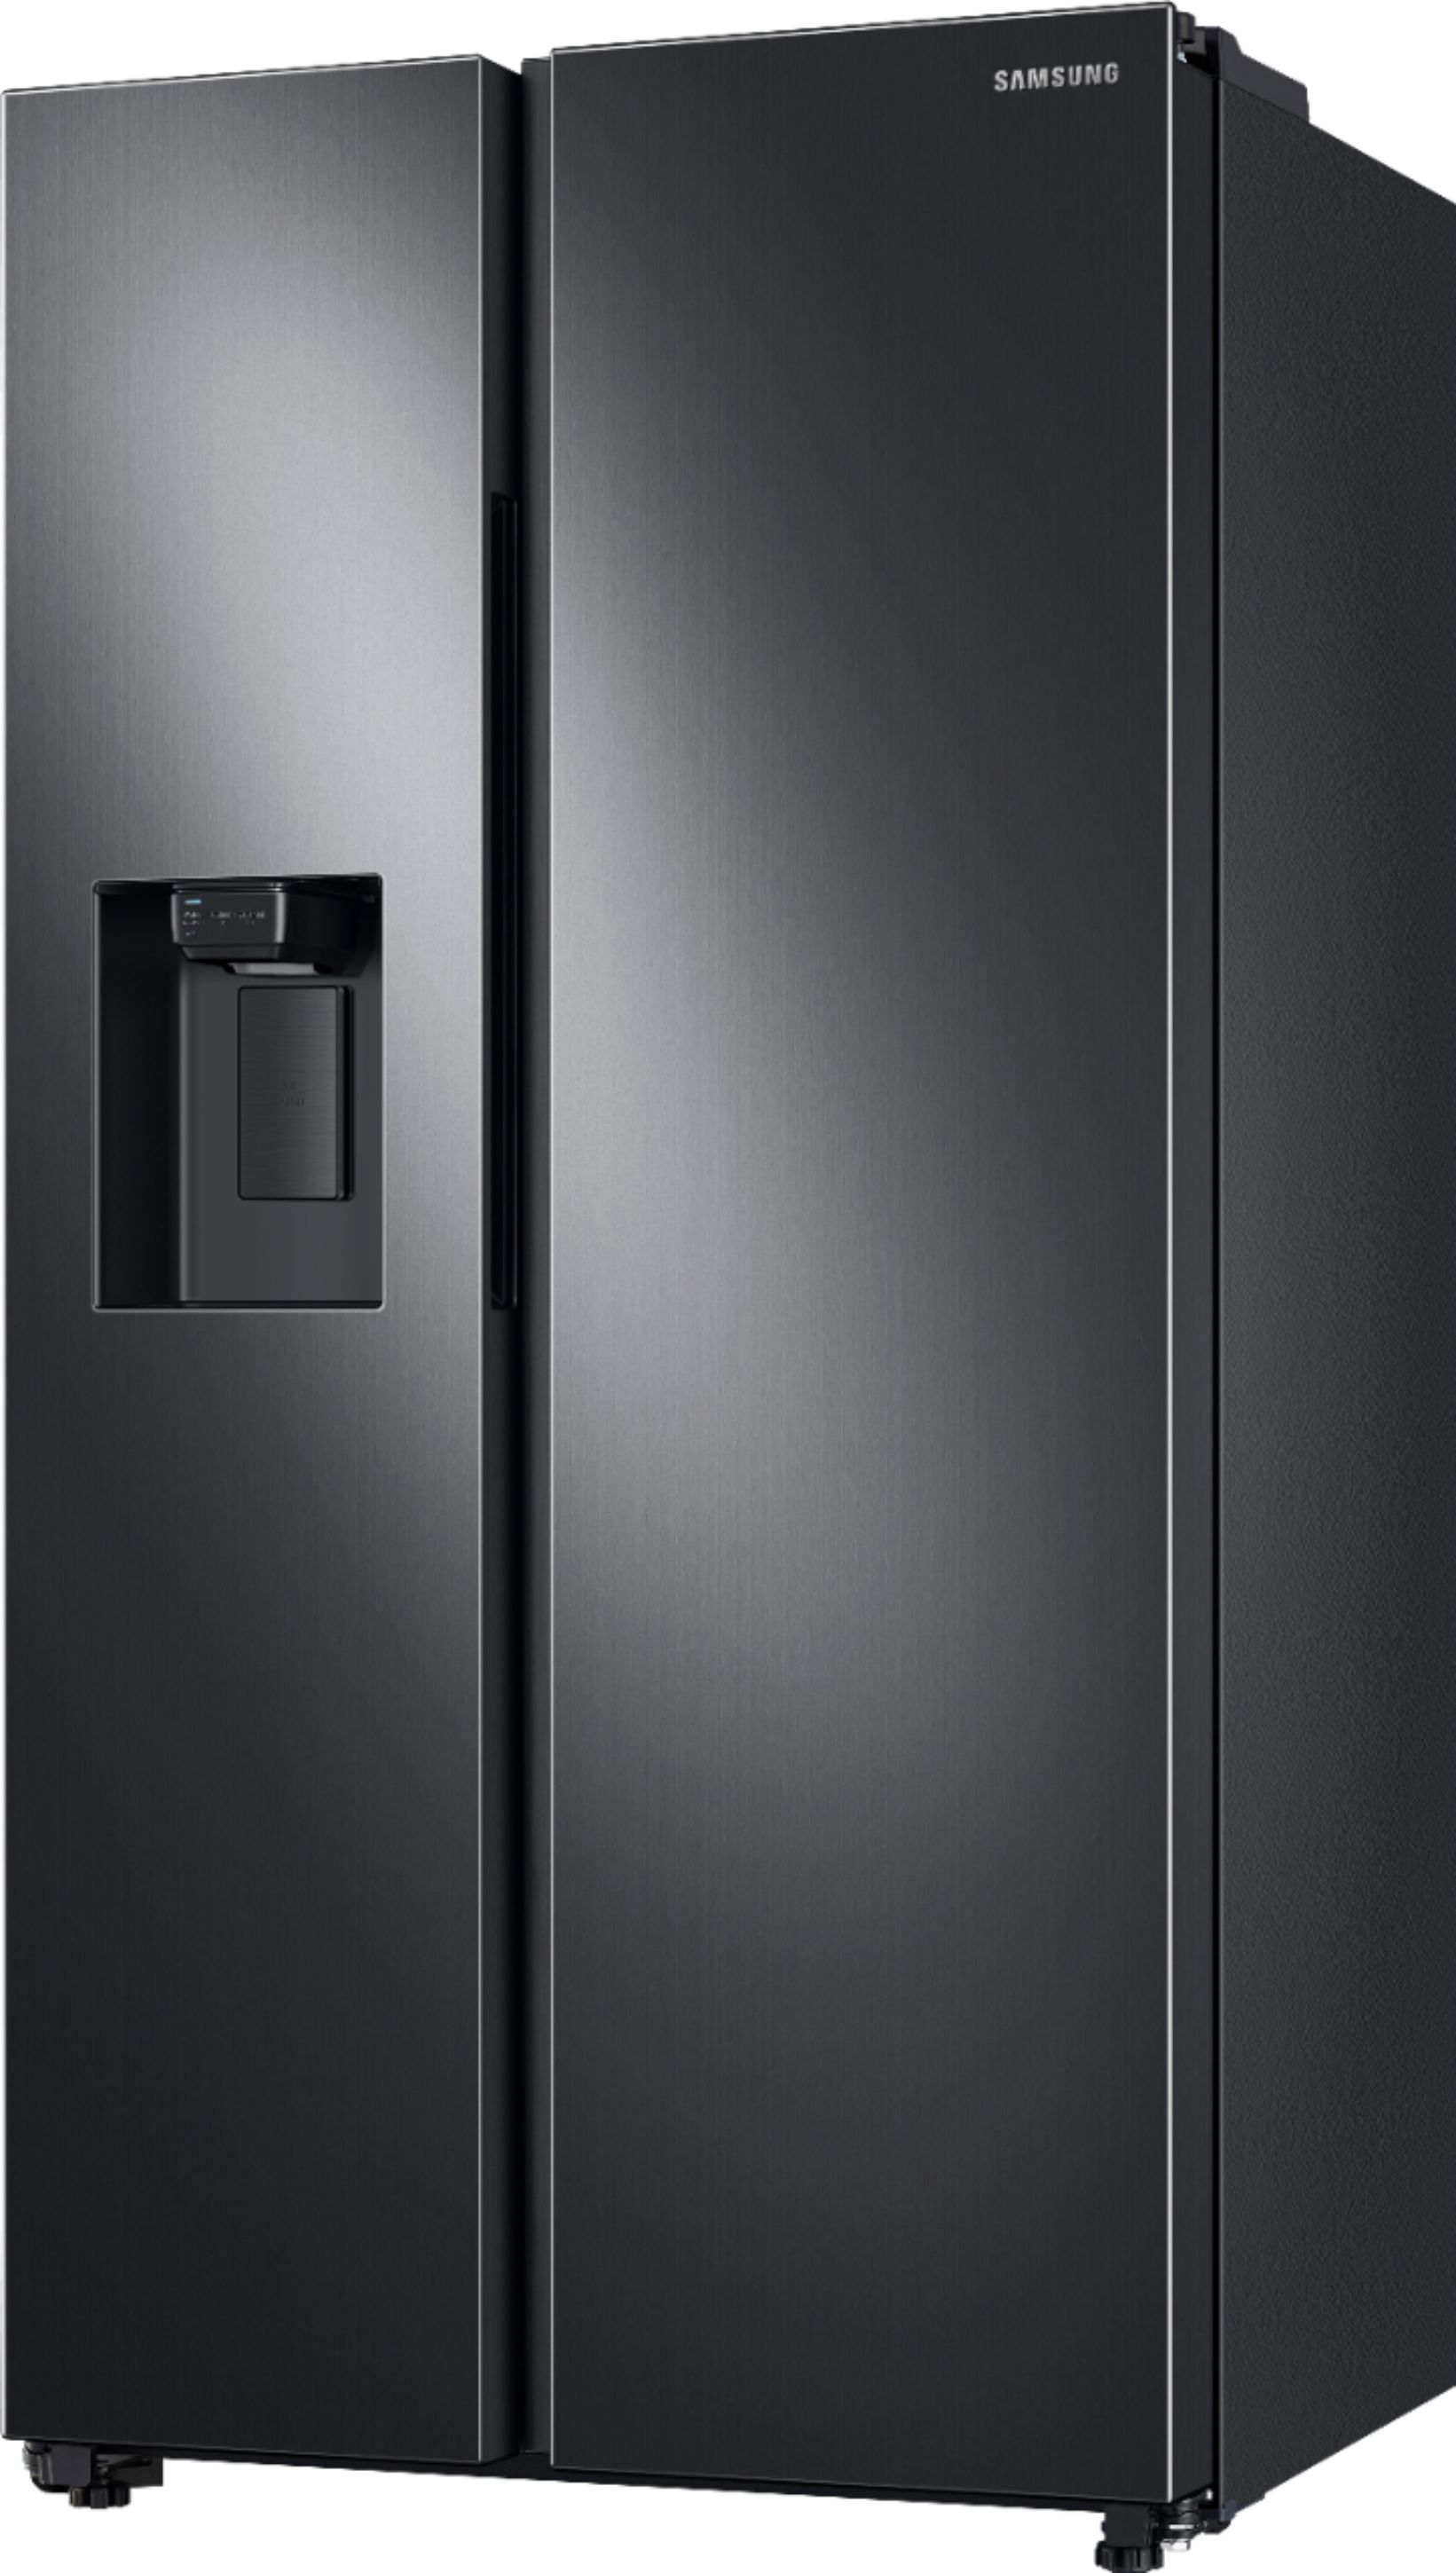 Left View: Samsung - 22 Cu. Ft. Side-by-Side Counter-Depth Refrigerator - Black stainless steel